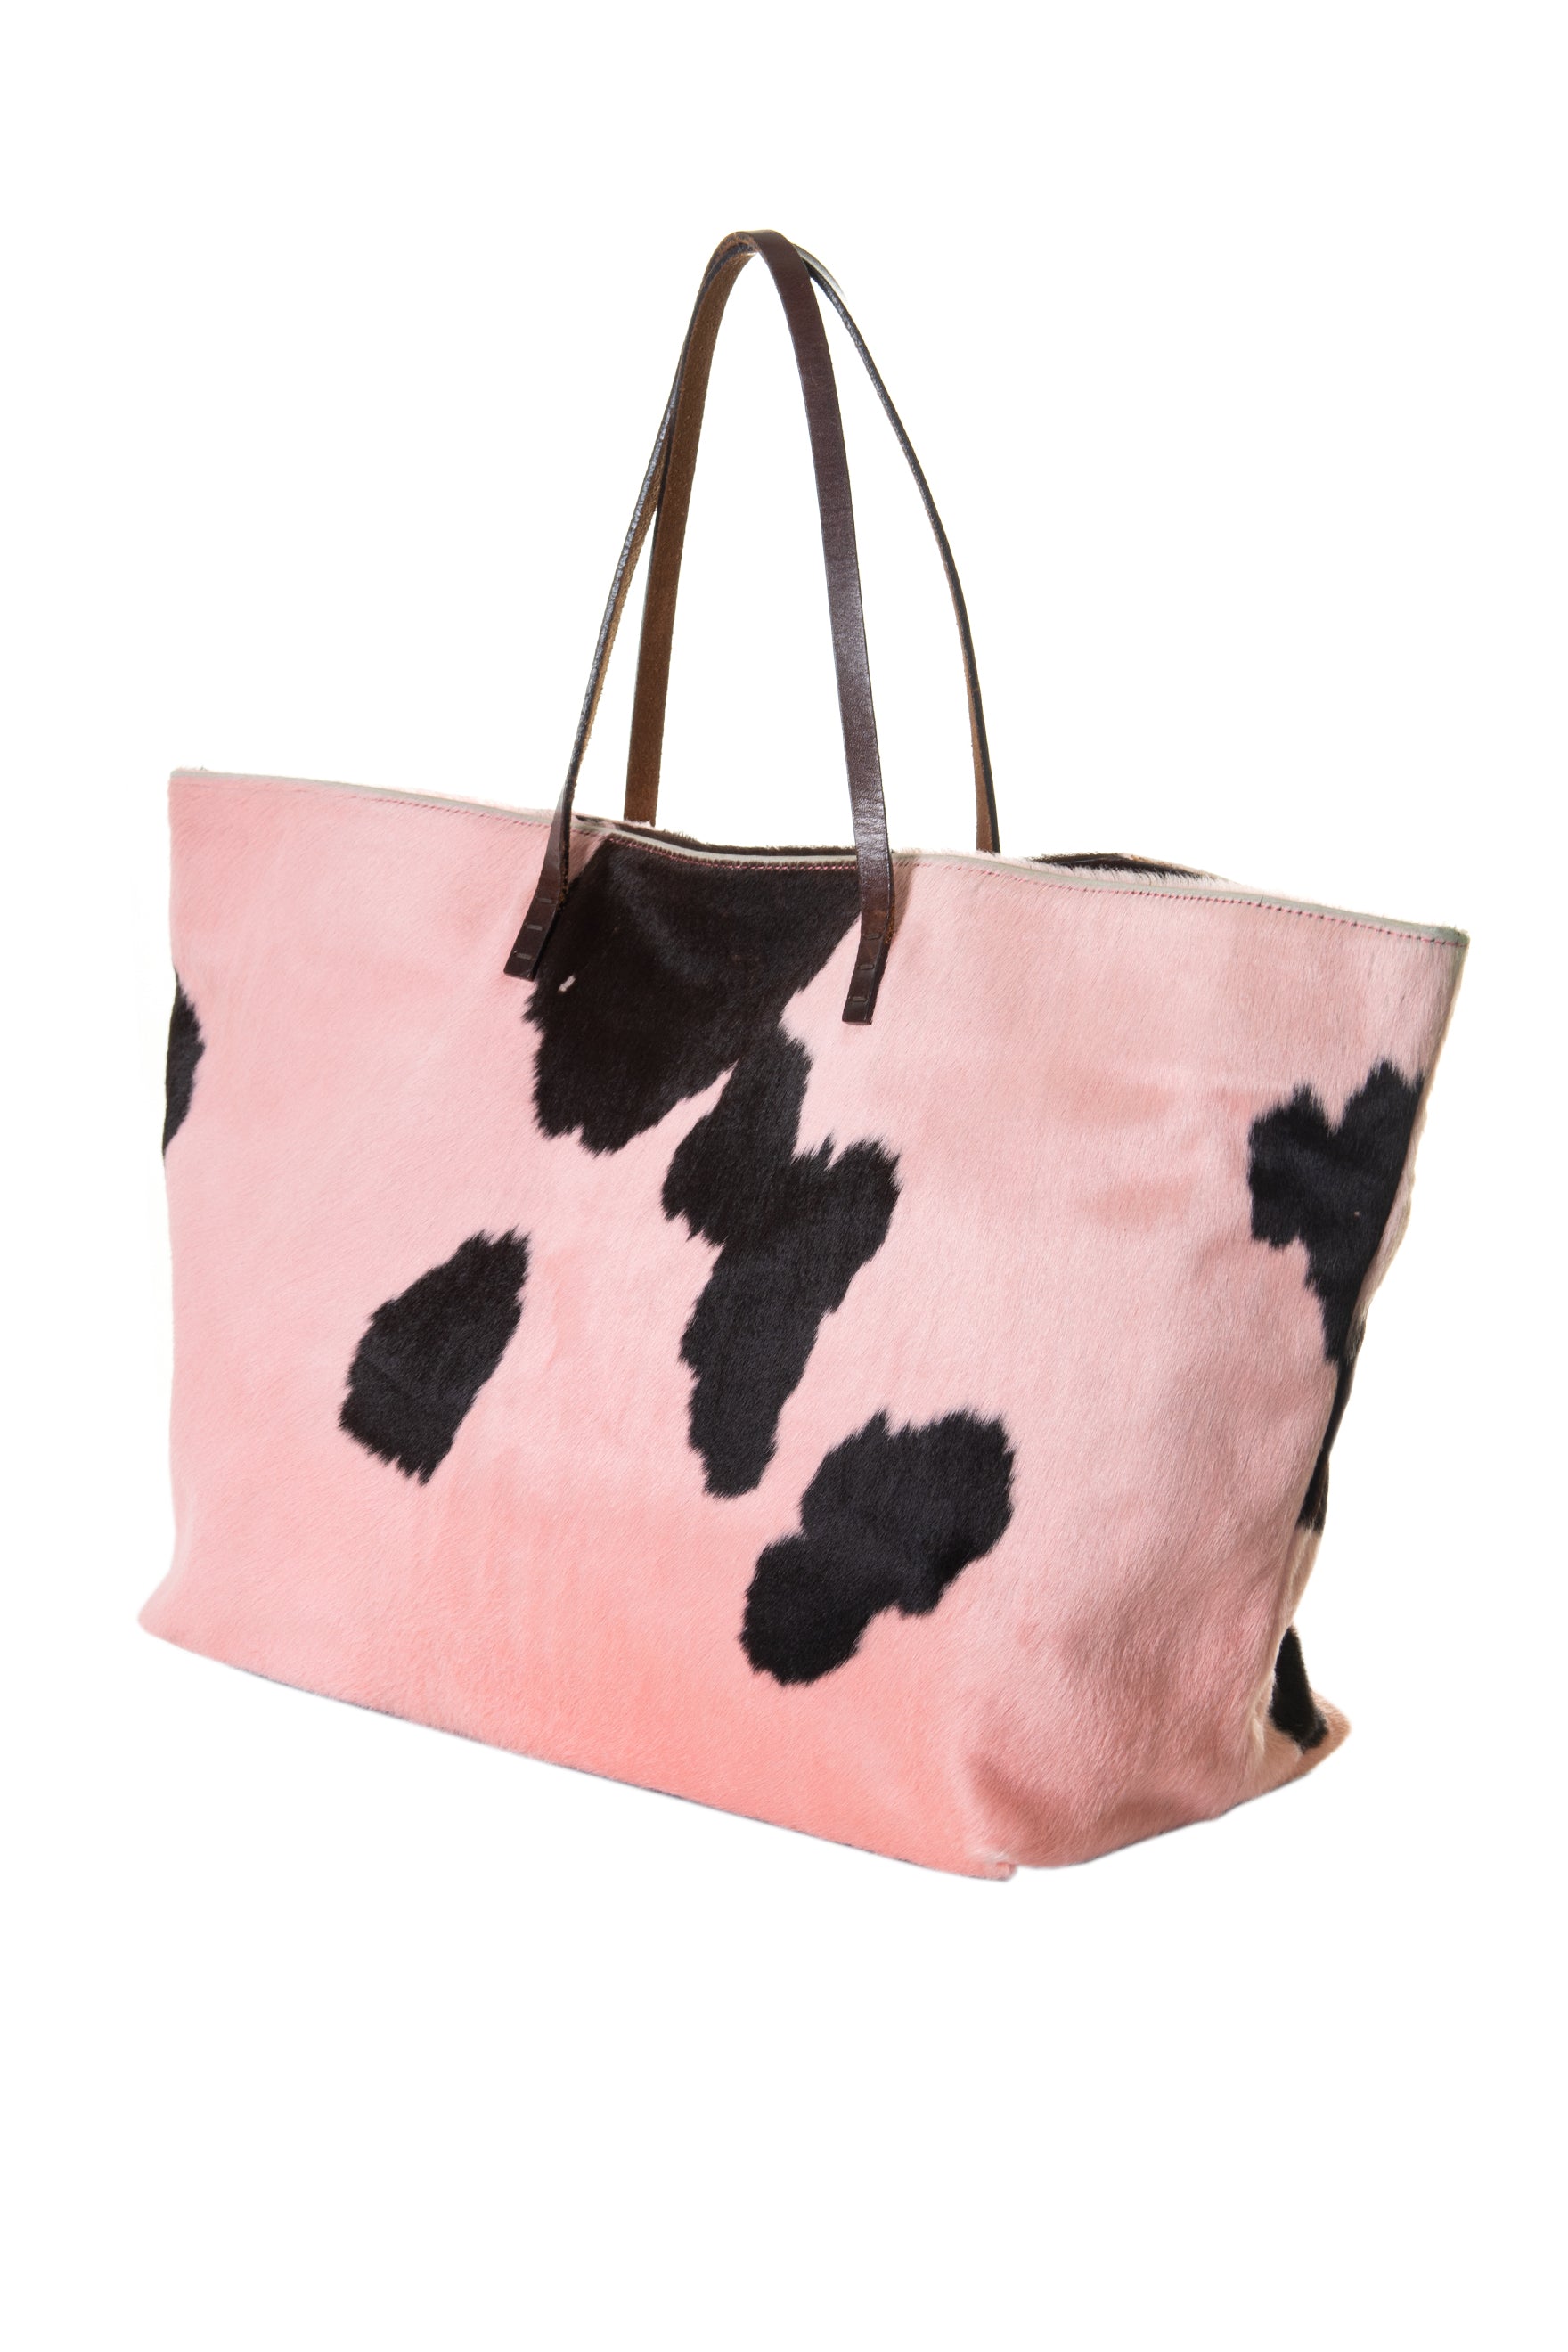 The Malibu LIMITED EDITION Pink Cowhide Fringe Purse – Countryside Co.